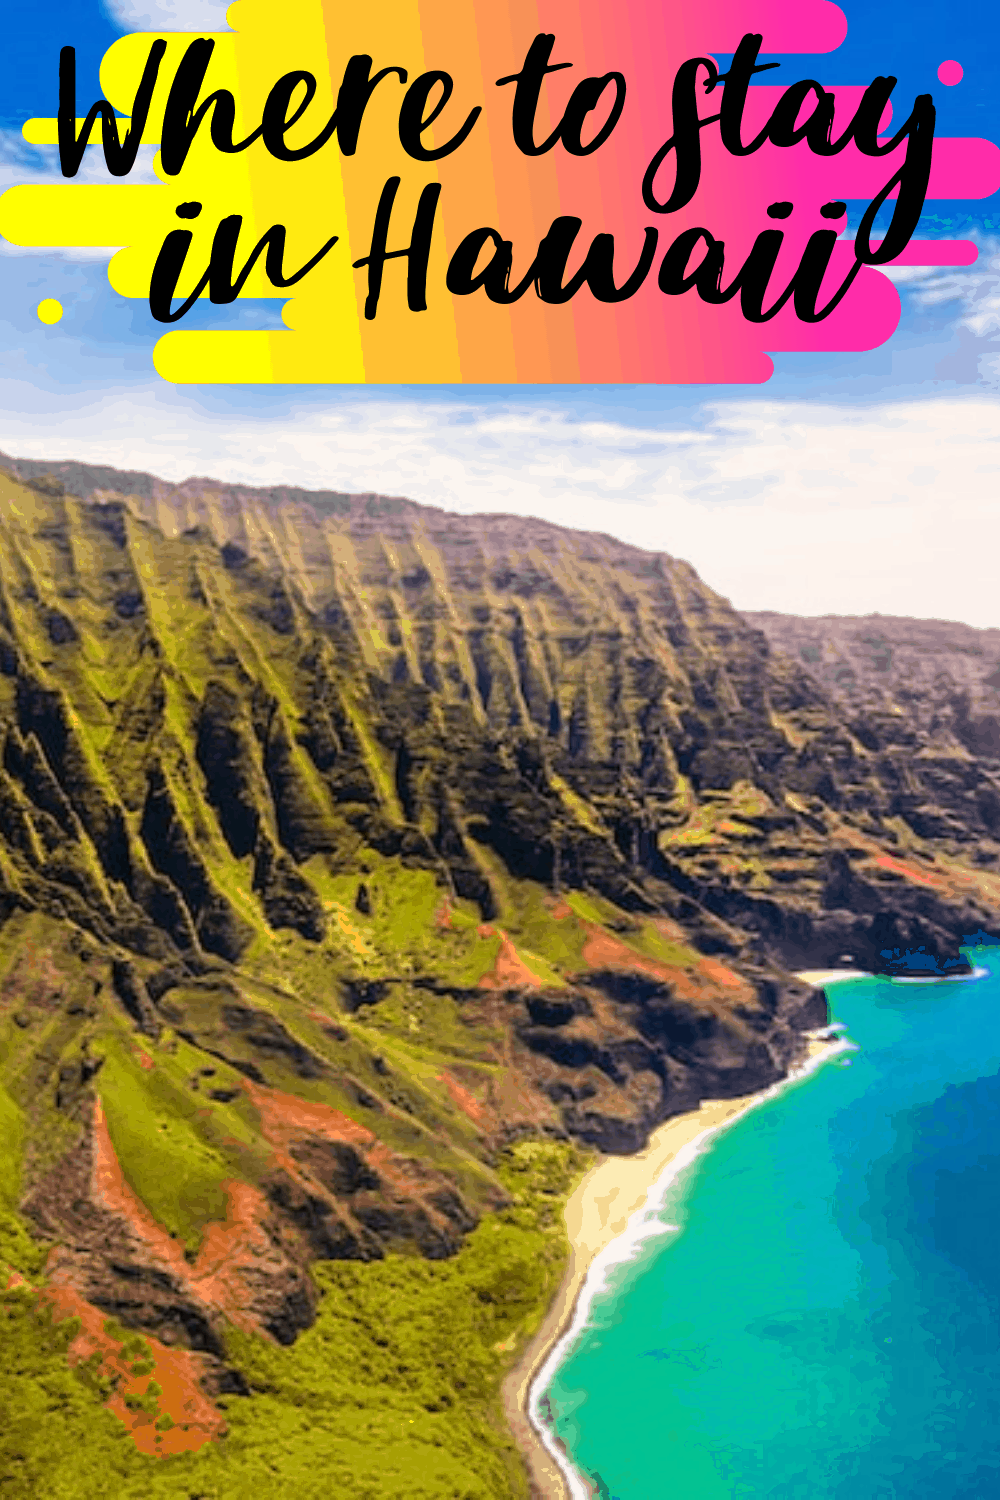 Where to stay in Hawaii